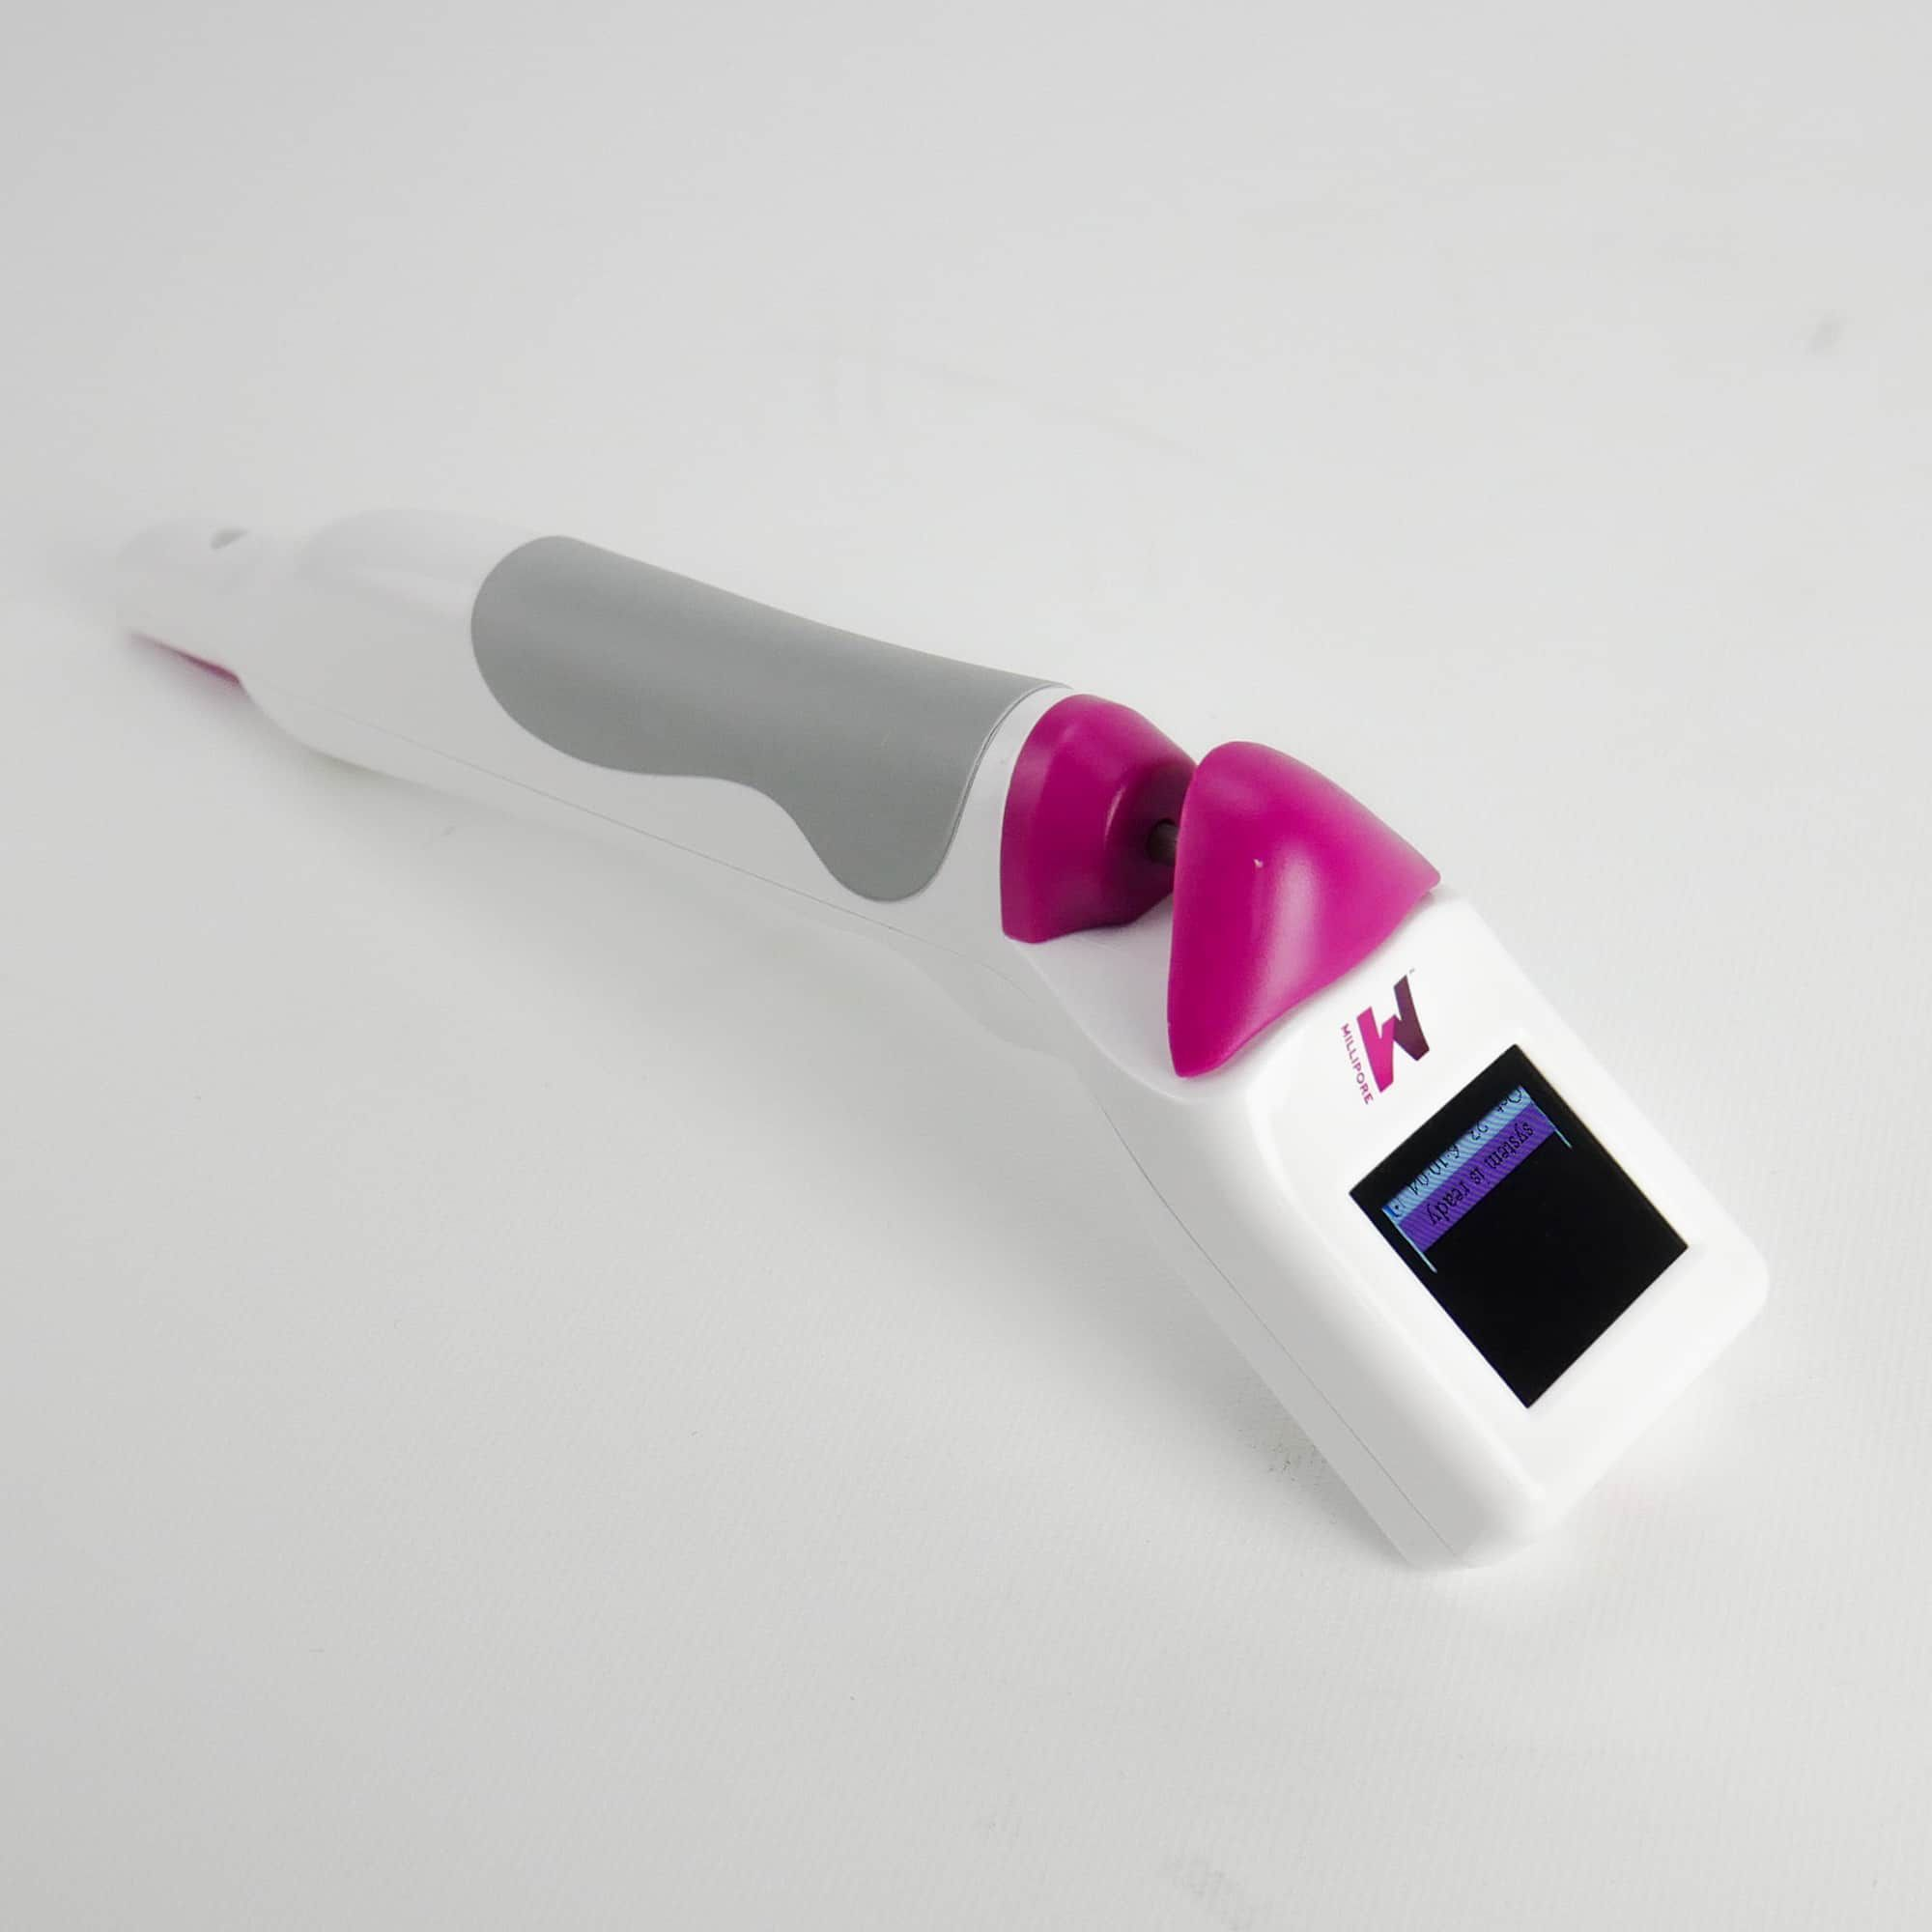 Millipore Scepter Automated Cell Counter with Sensors